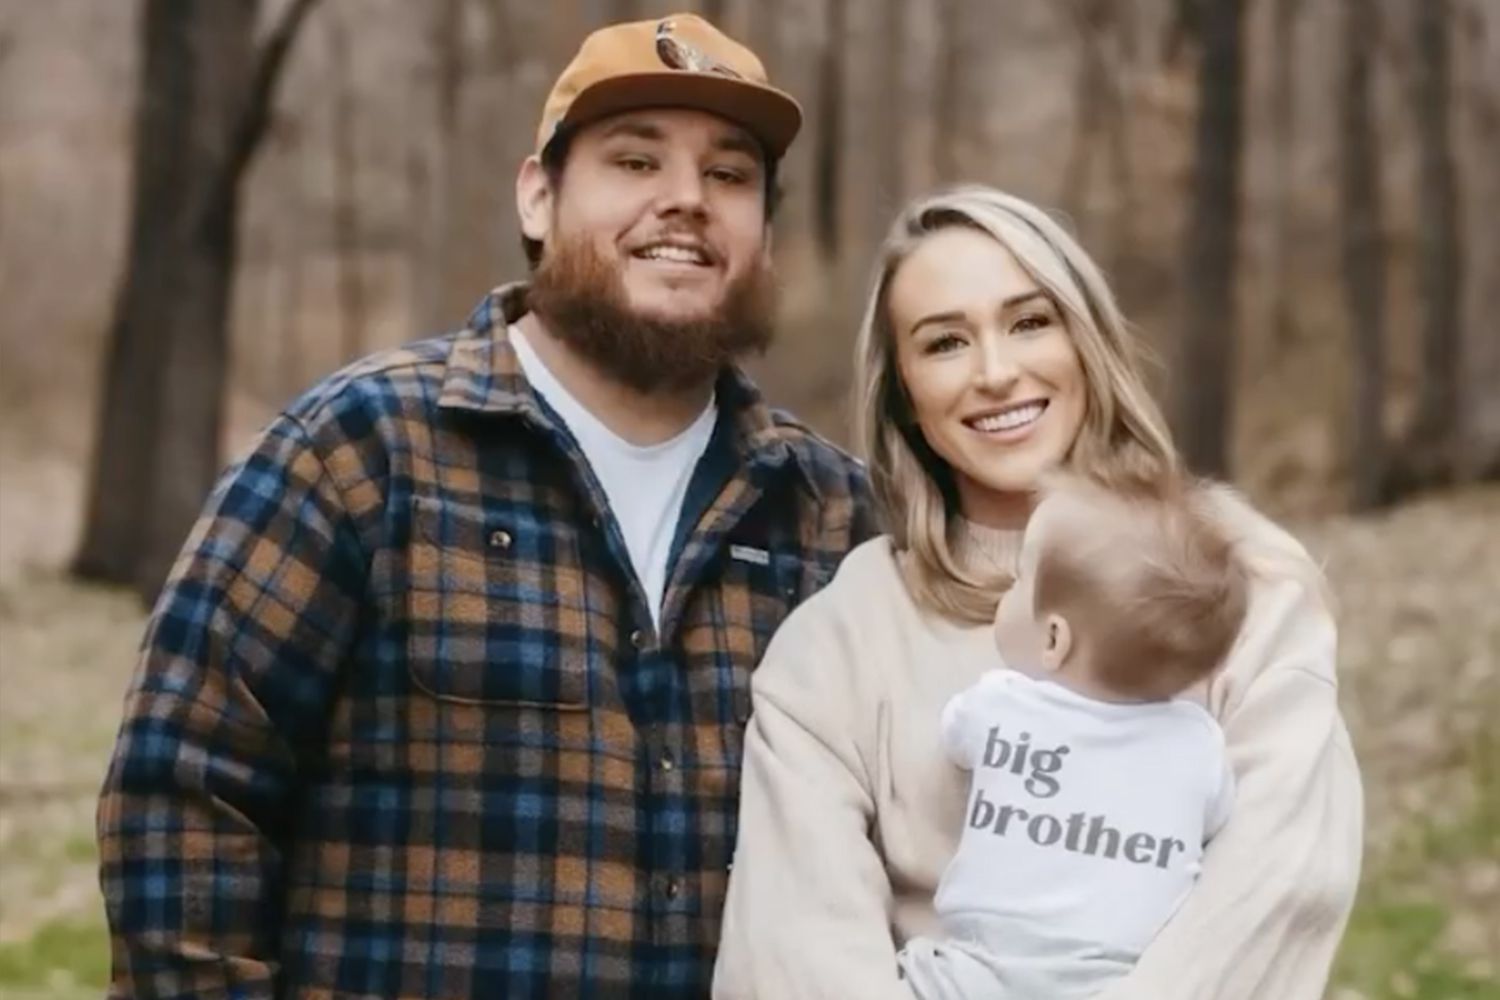 https://www.instagram.com/p/CqB3tnUjly8/ lukecombs Verified Joining the 2 under 2 club! Baby boy #2 coming this September!! 1h